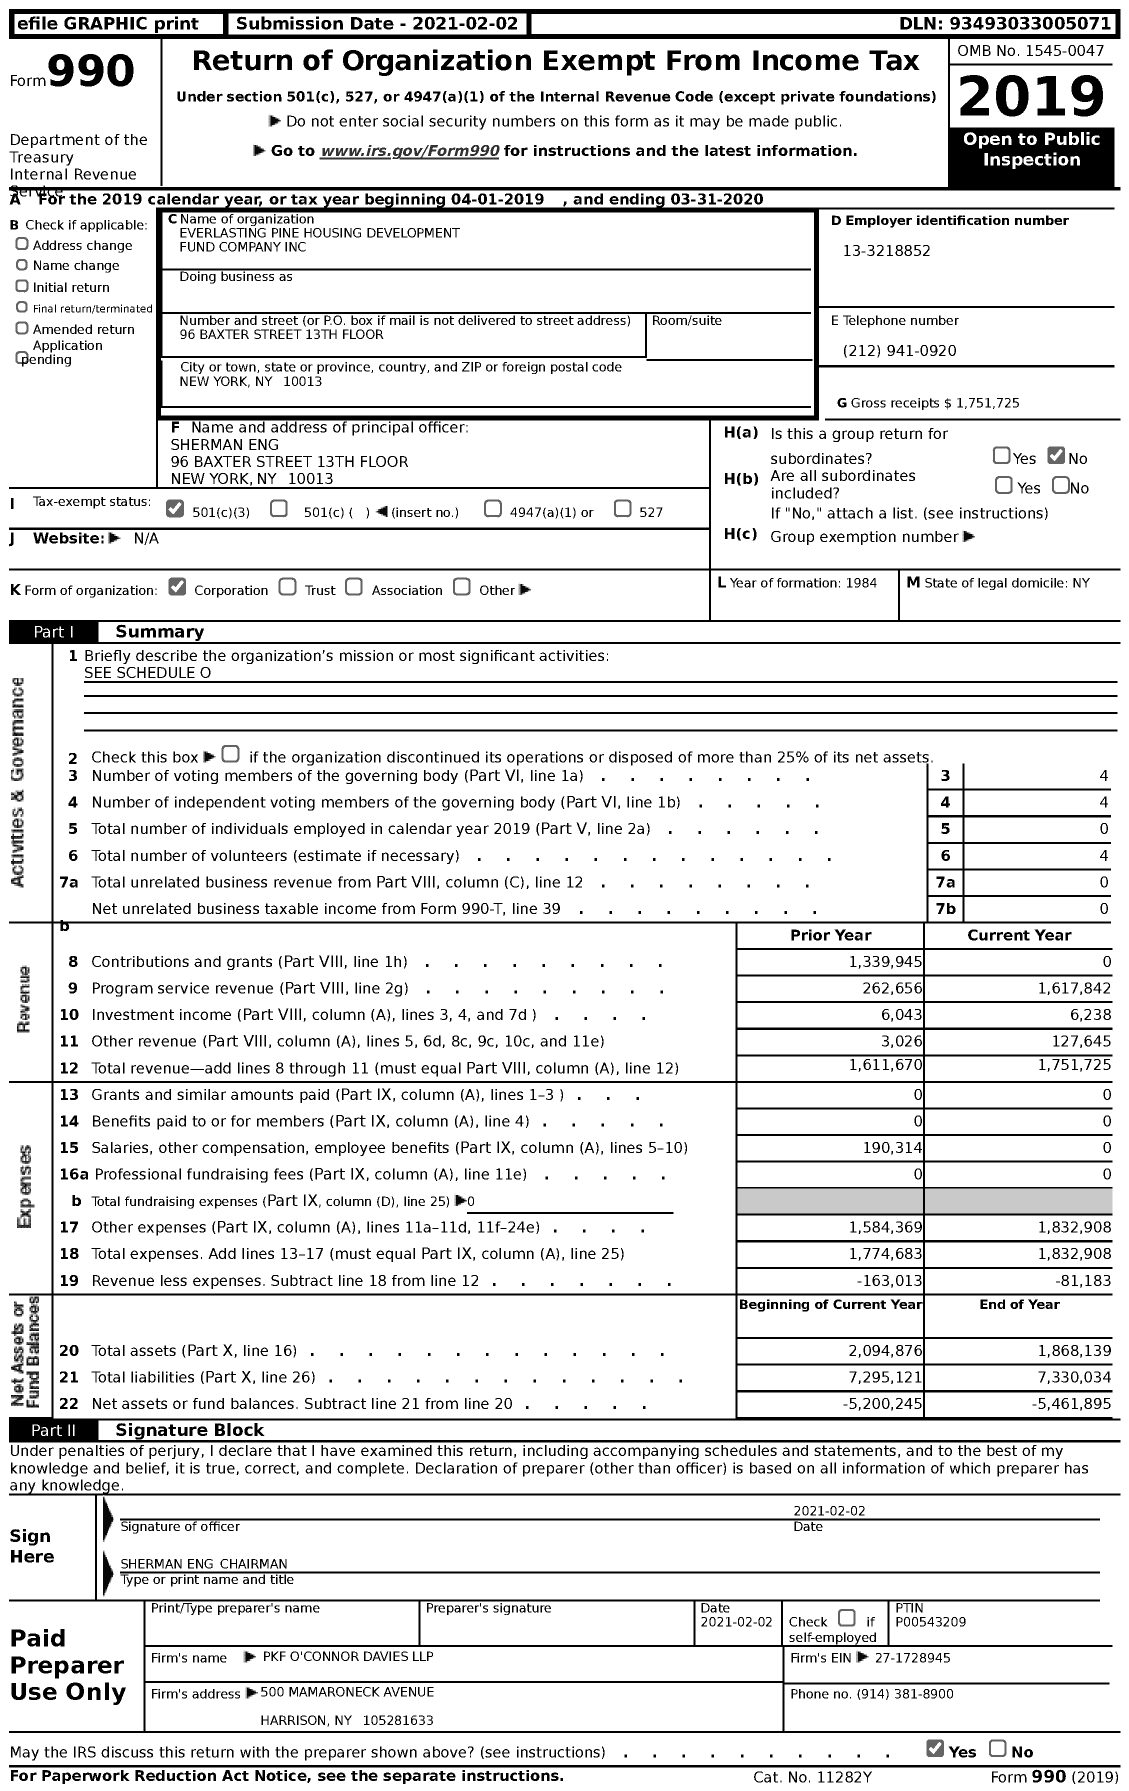 Image of first page of 2019 Form 990 for Everlasting Pine Housing Development Fund Company